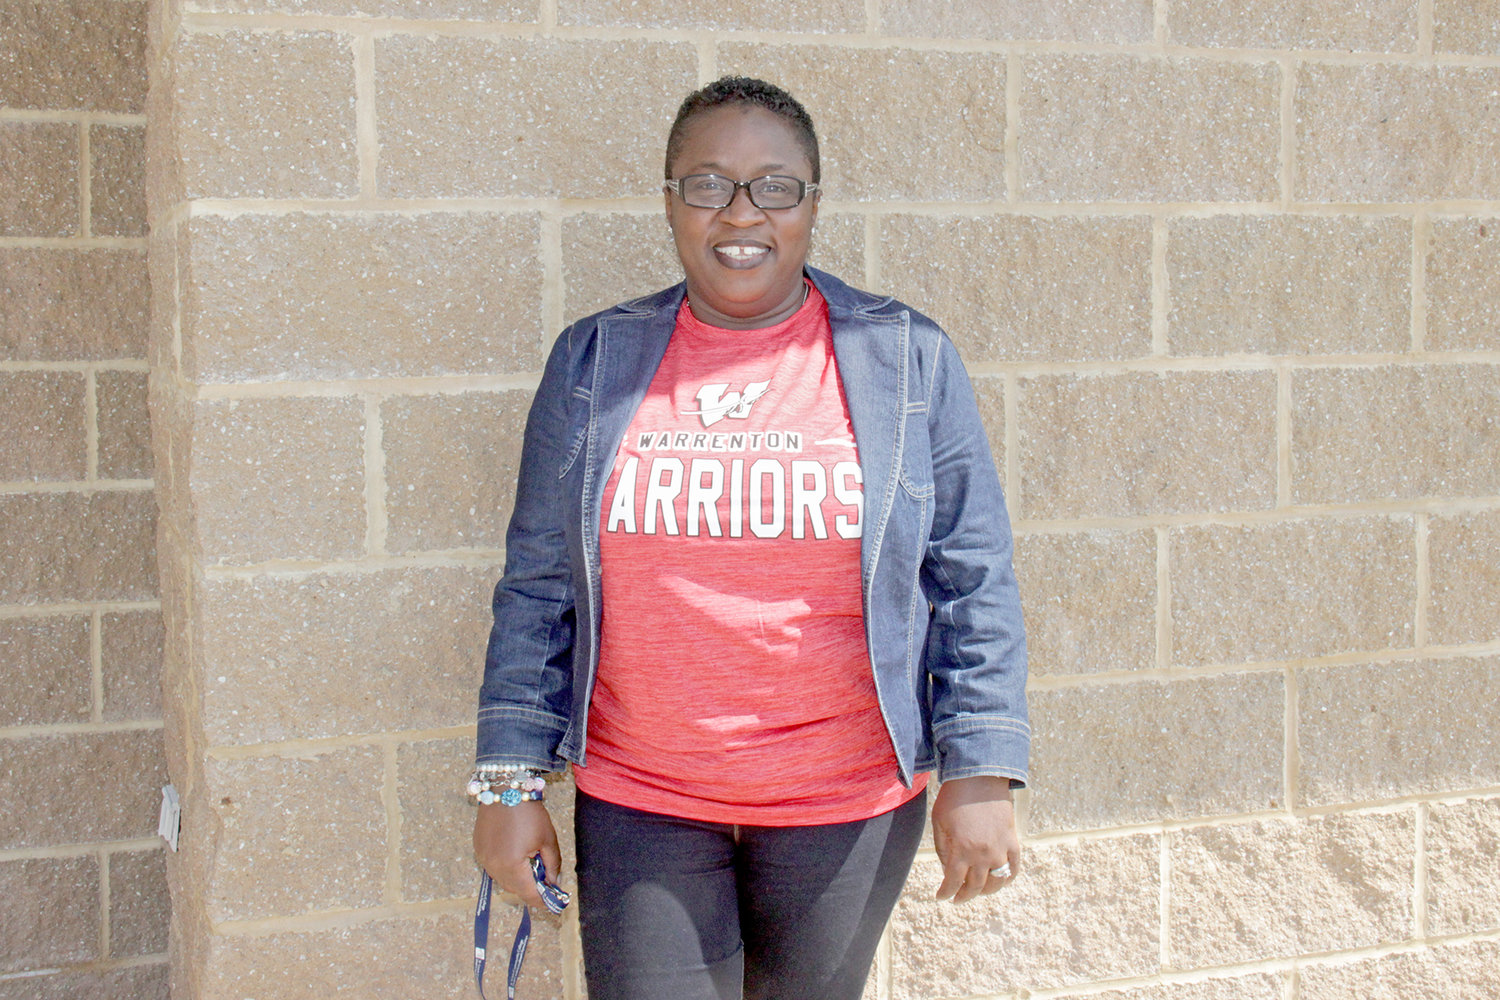 NEW PRINCIPAL — Ayo Alfred, the new principal of Alpha Academy in Warrenton, brings 21 years of education experience, most of it in alternative education programs. Her goal is to provide a service that meets the needs of students who weren’t best served by traditional classes.